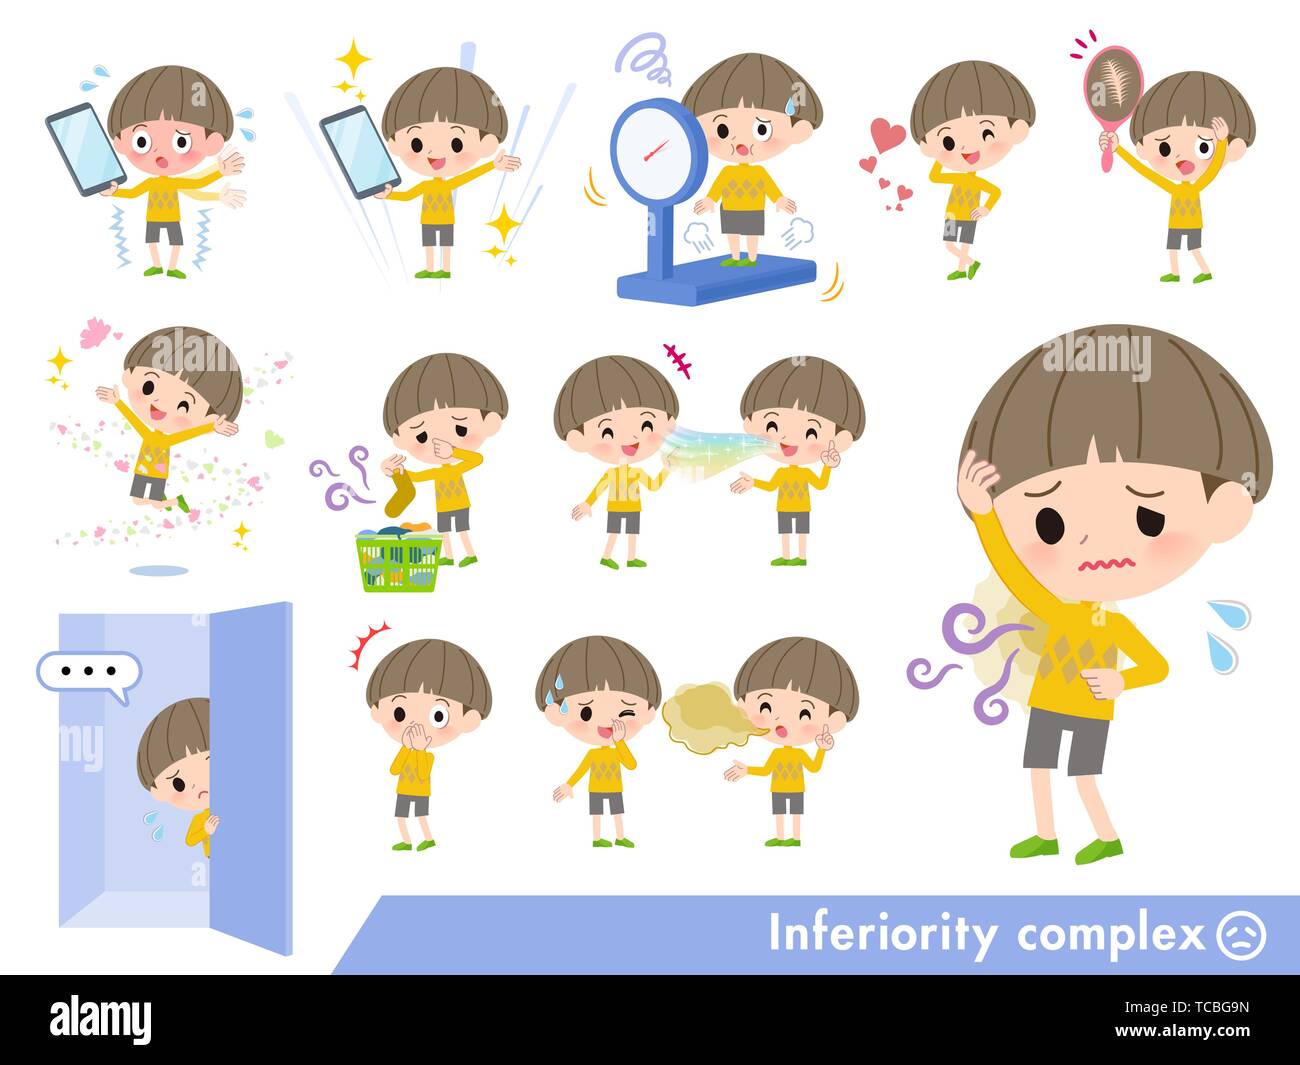 A set of boy on inferiority complex.There are actions suffering from smell and appearance.It's vector art so it's easy to edit. Stock Vector